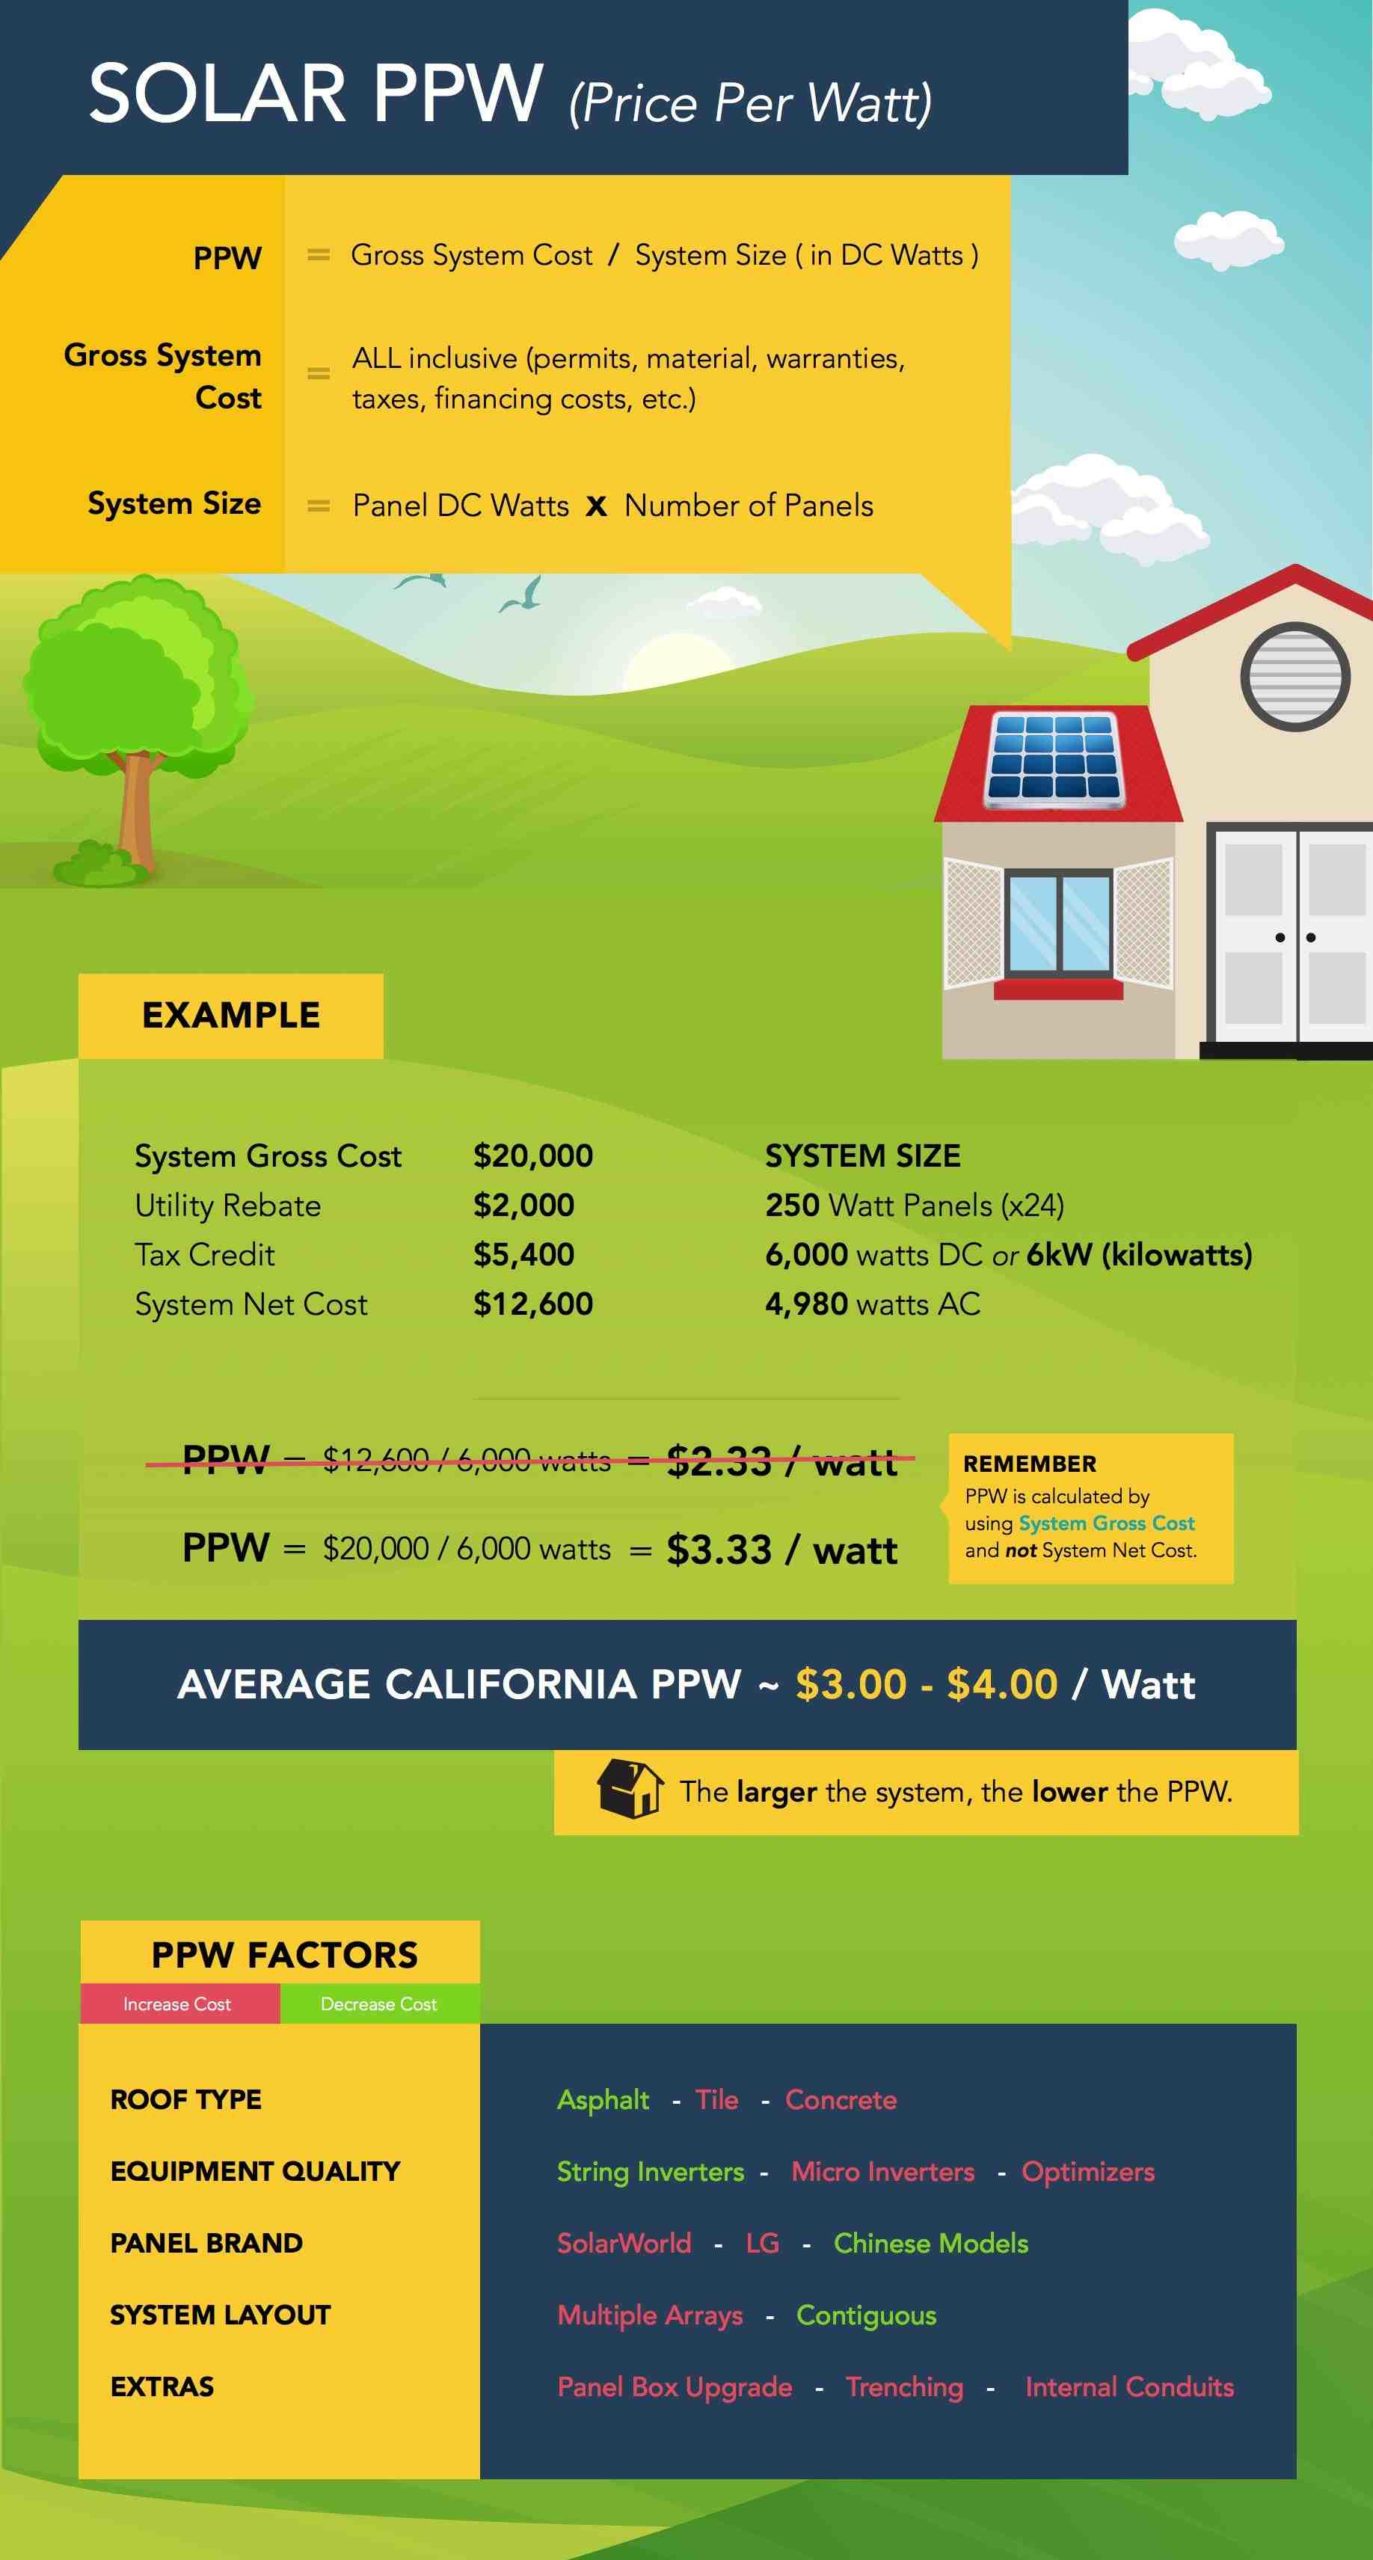 How much does it cost to keep solar panels?